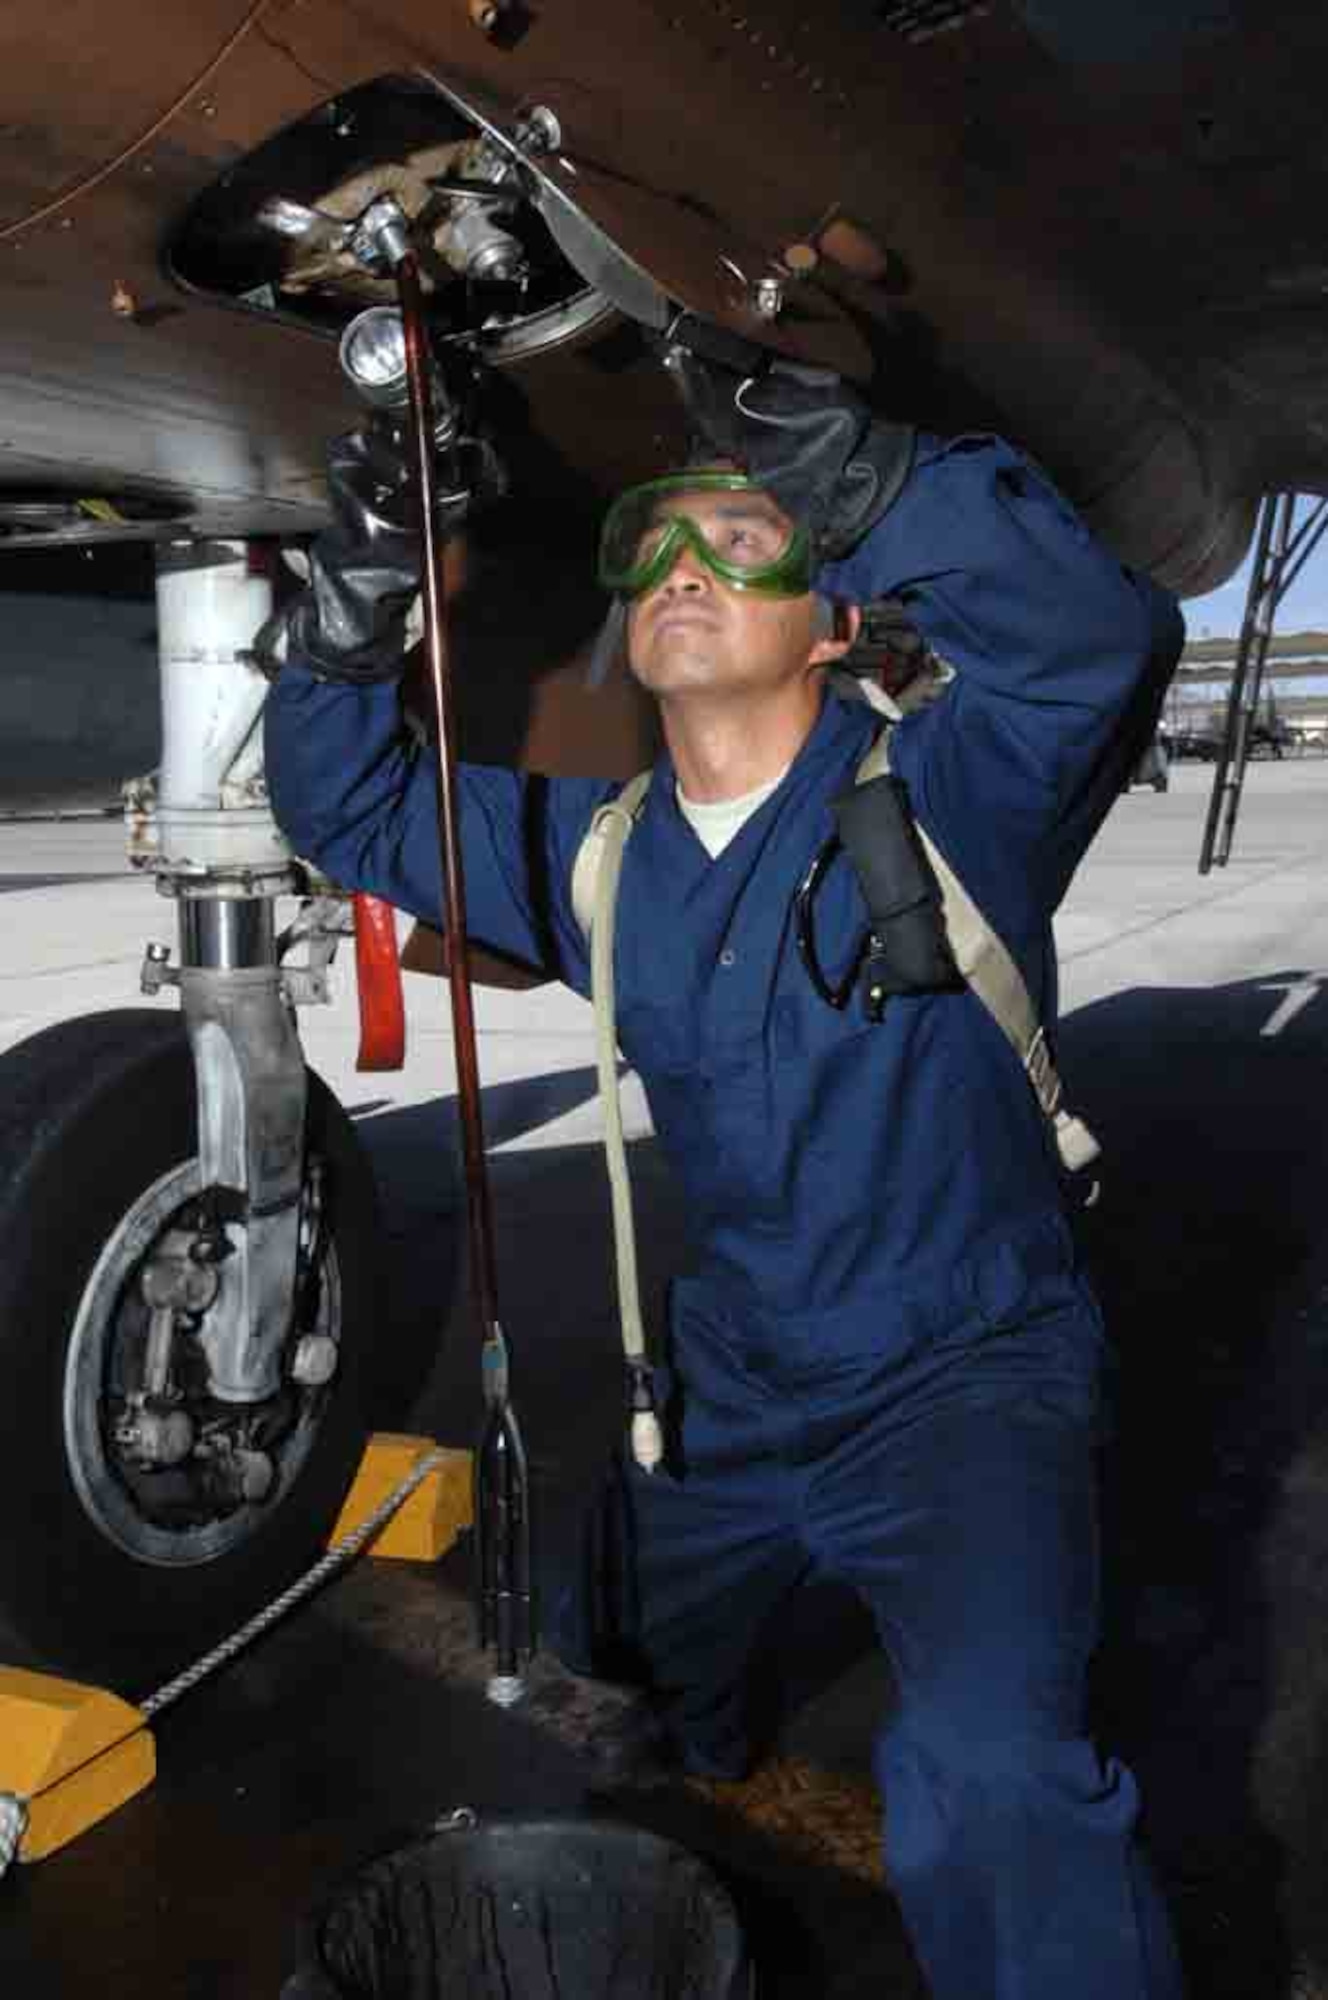 Staff Sgt. Raymond Oliveros, an F-15 crew chief assigned to the 926th Group Detachment 2, services a generator on an F-15 July 24, 2008 at Nellis Air Force Base, Nev. The 926th Group is an Air Force Reserve unit under 10th Air Force, Naval Air Station Joint Reserve Base, Fort Worth, Texas. The group is located at Nellis AFB as an associate unit to the United States Air Force Warfare Center. Through Total Force Integration, reservists are integrated into regular Air Force units, accomplishing the USAFWC's mission alongside REGAF personnel on a daily basis.
(U.S. Air Force Photo/Senior Airman Larry E. Reid Jr., Released)